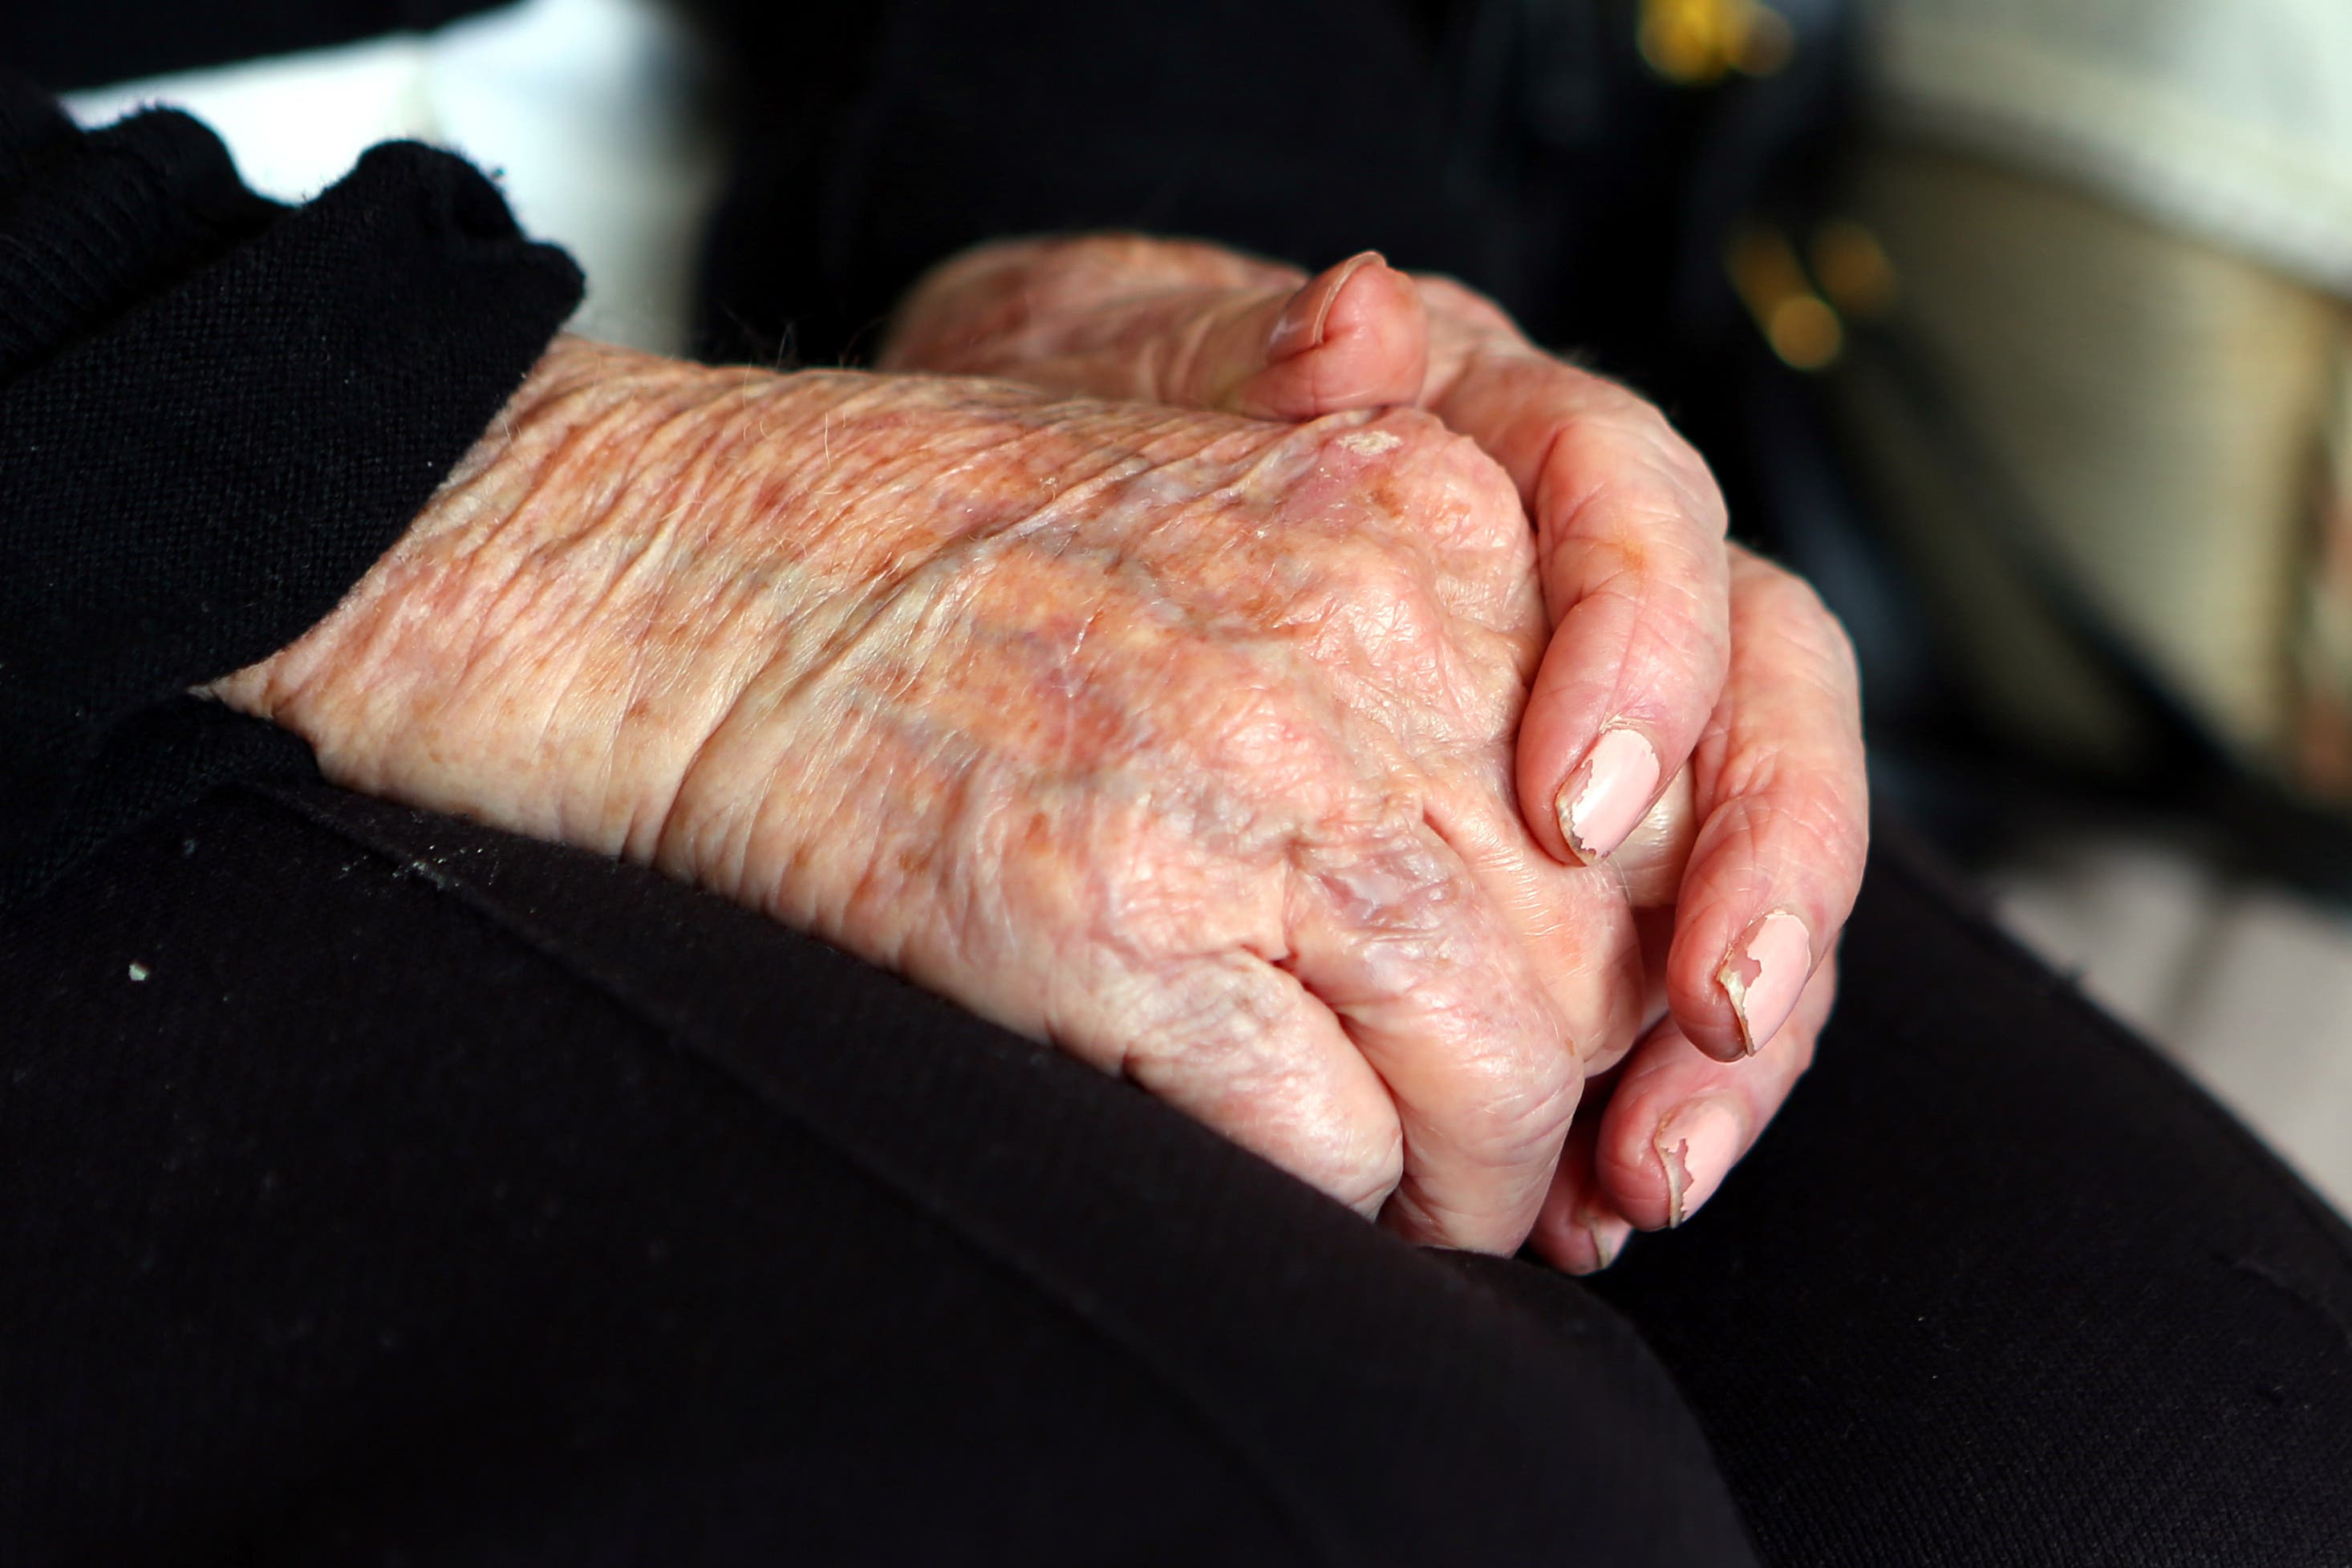 Researchers identify rare genetic resilience to Alzheimer’s disease – study (Peter Byrne/PA)